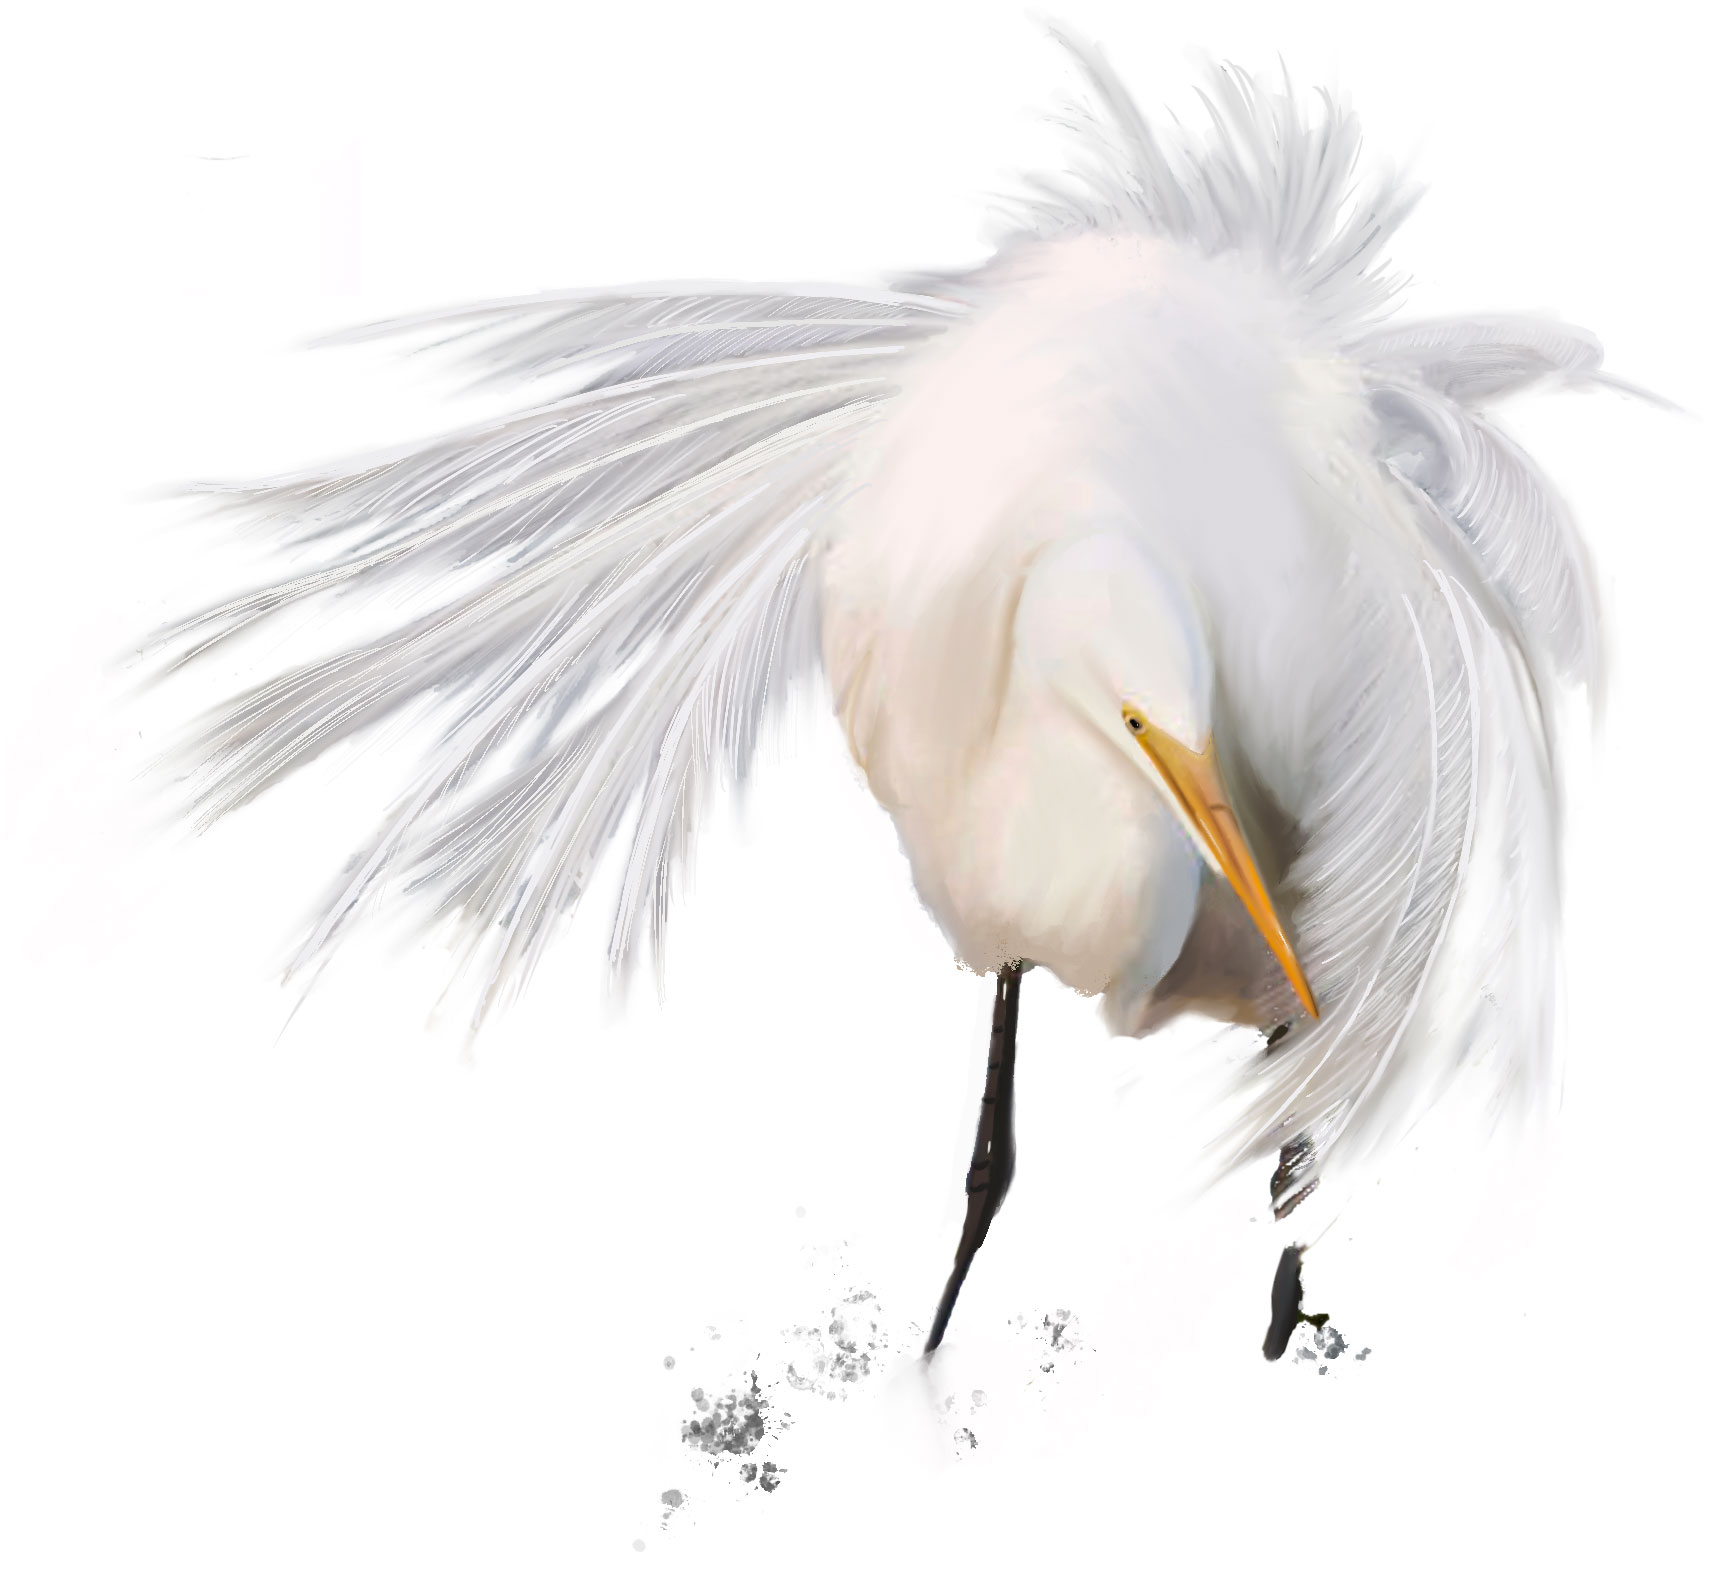 Painting of a Great Egret bird